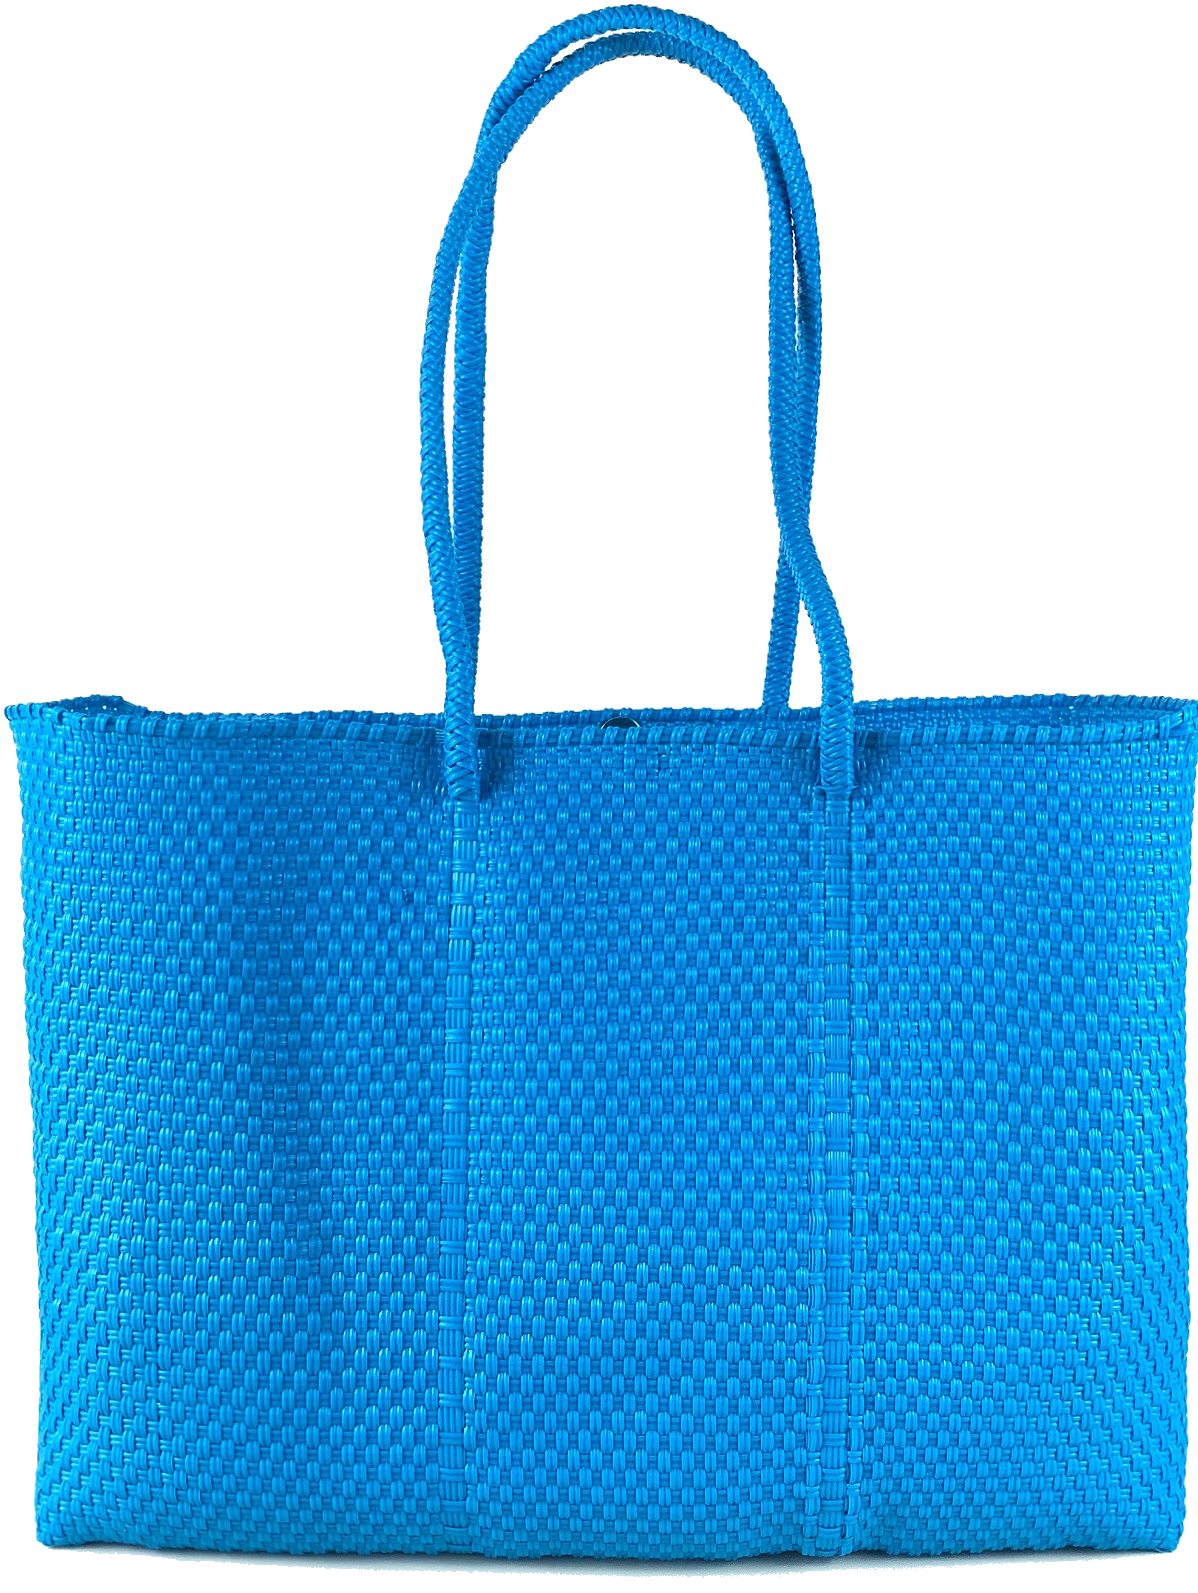 Tote - Turquoise